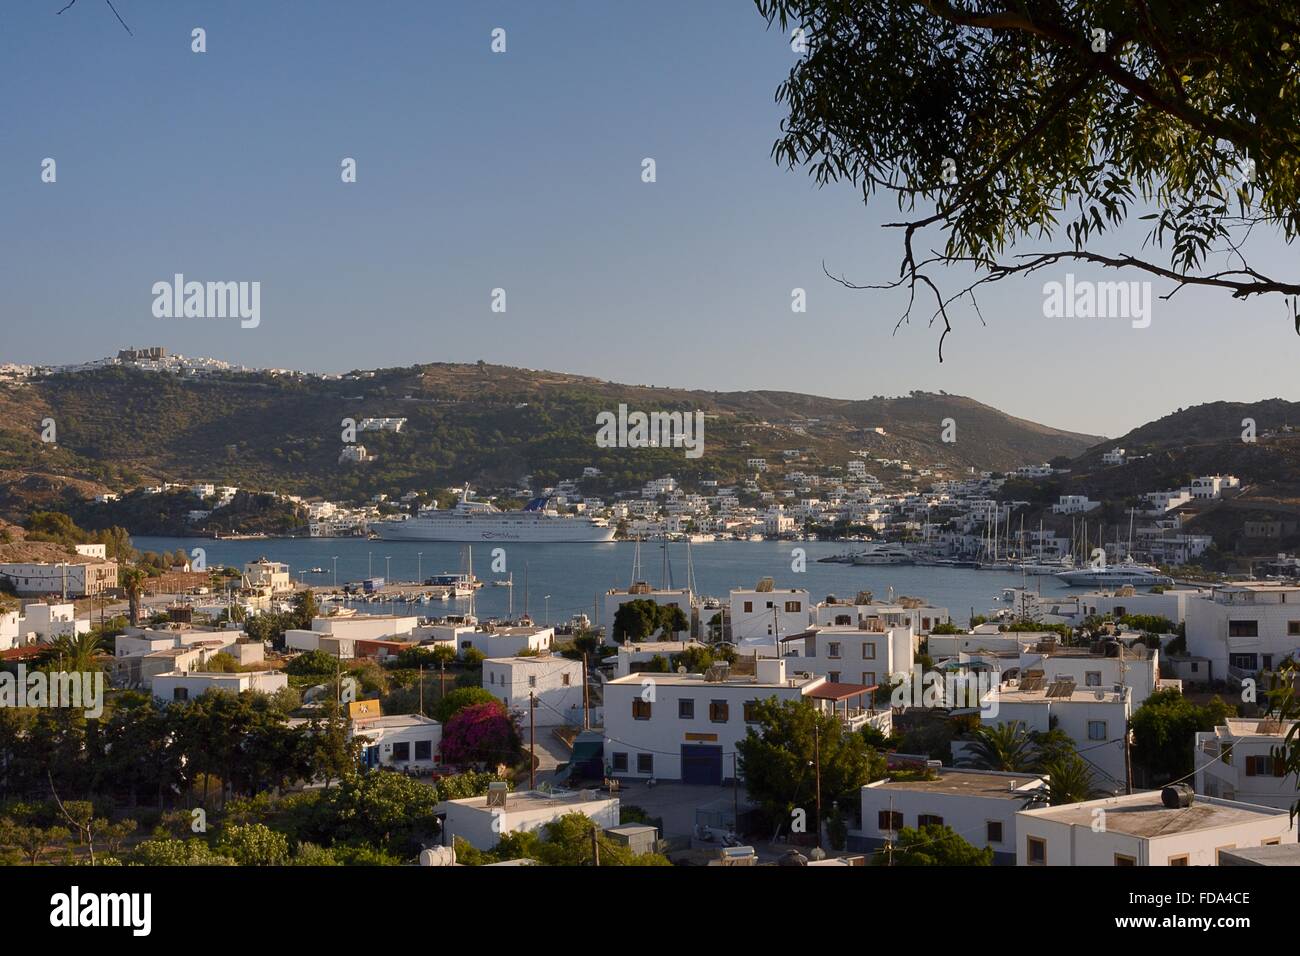 Overview of Skala harbour, Patmos, Dodecanese Islands, Greece. Stock Photo